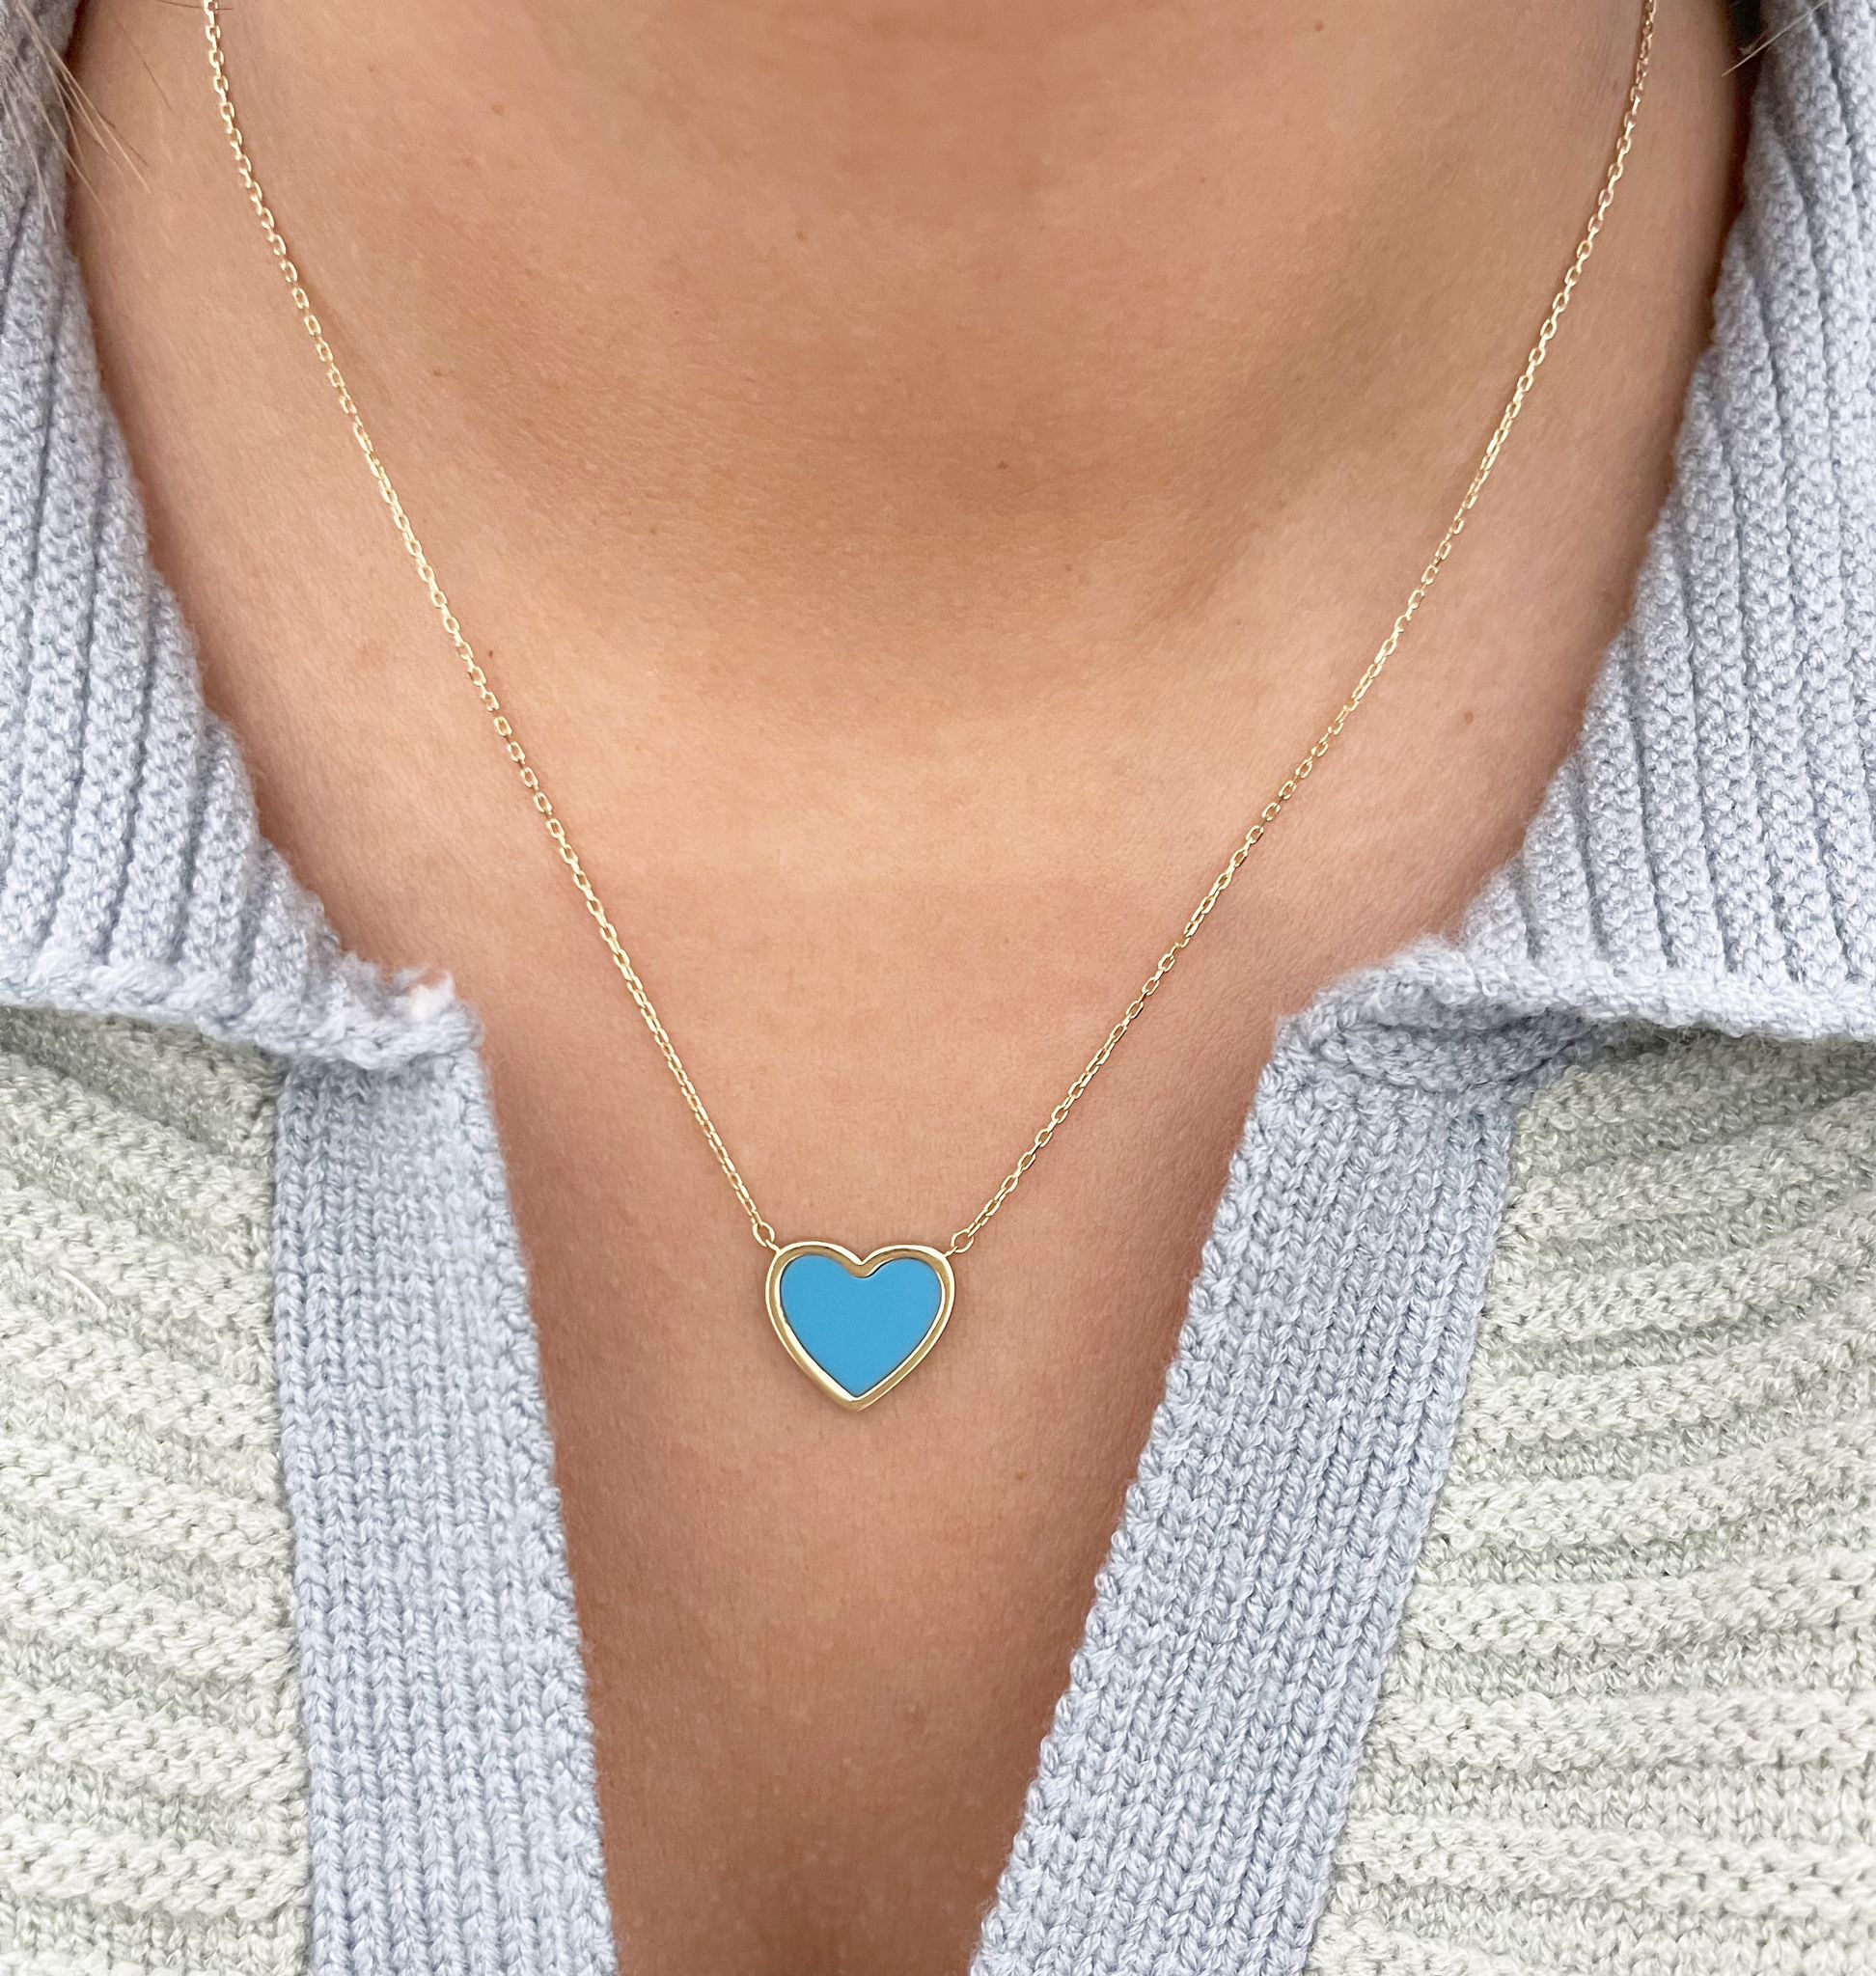 Turquoise heart gold necklace